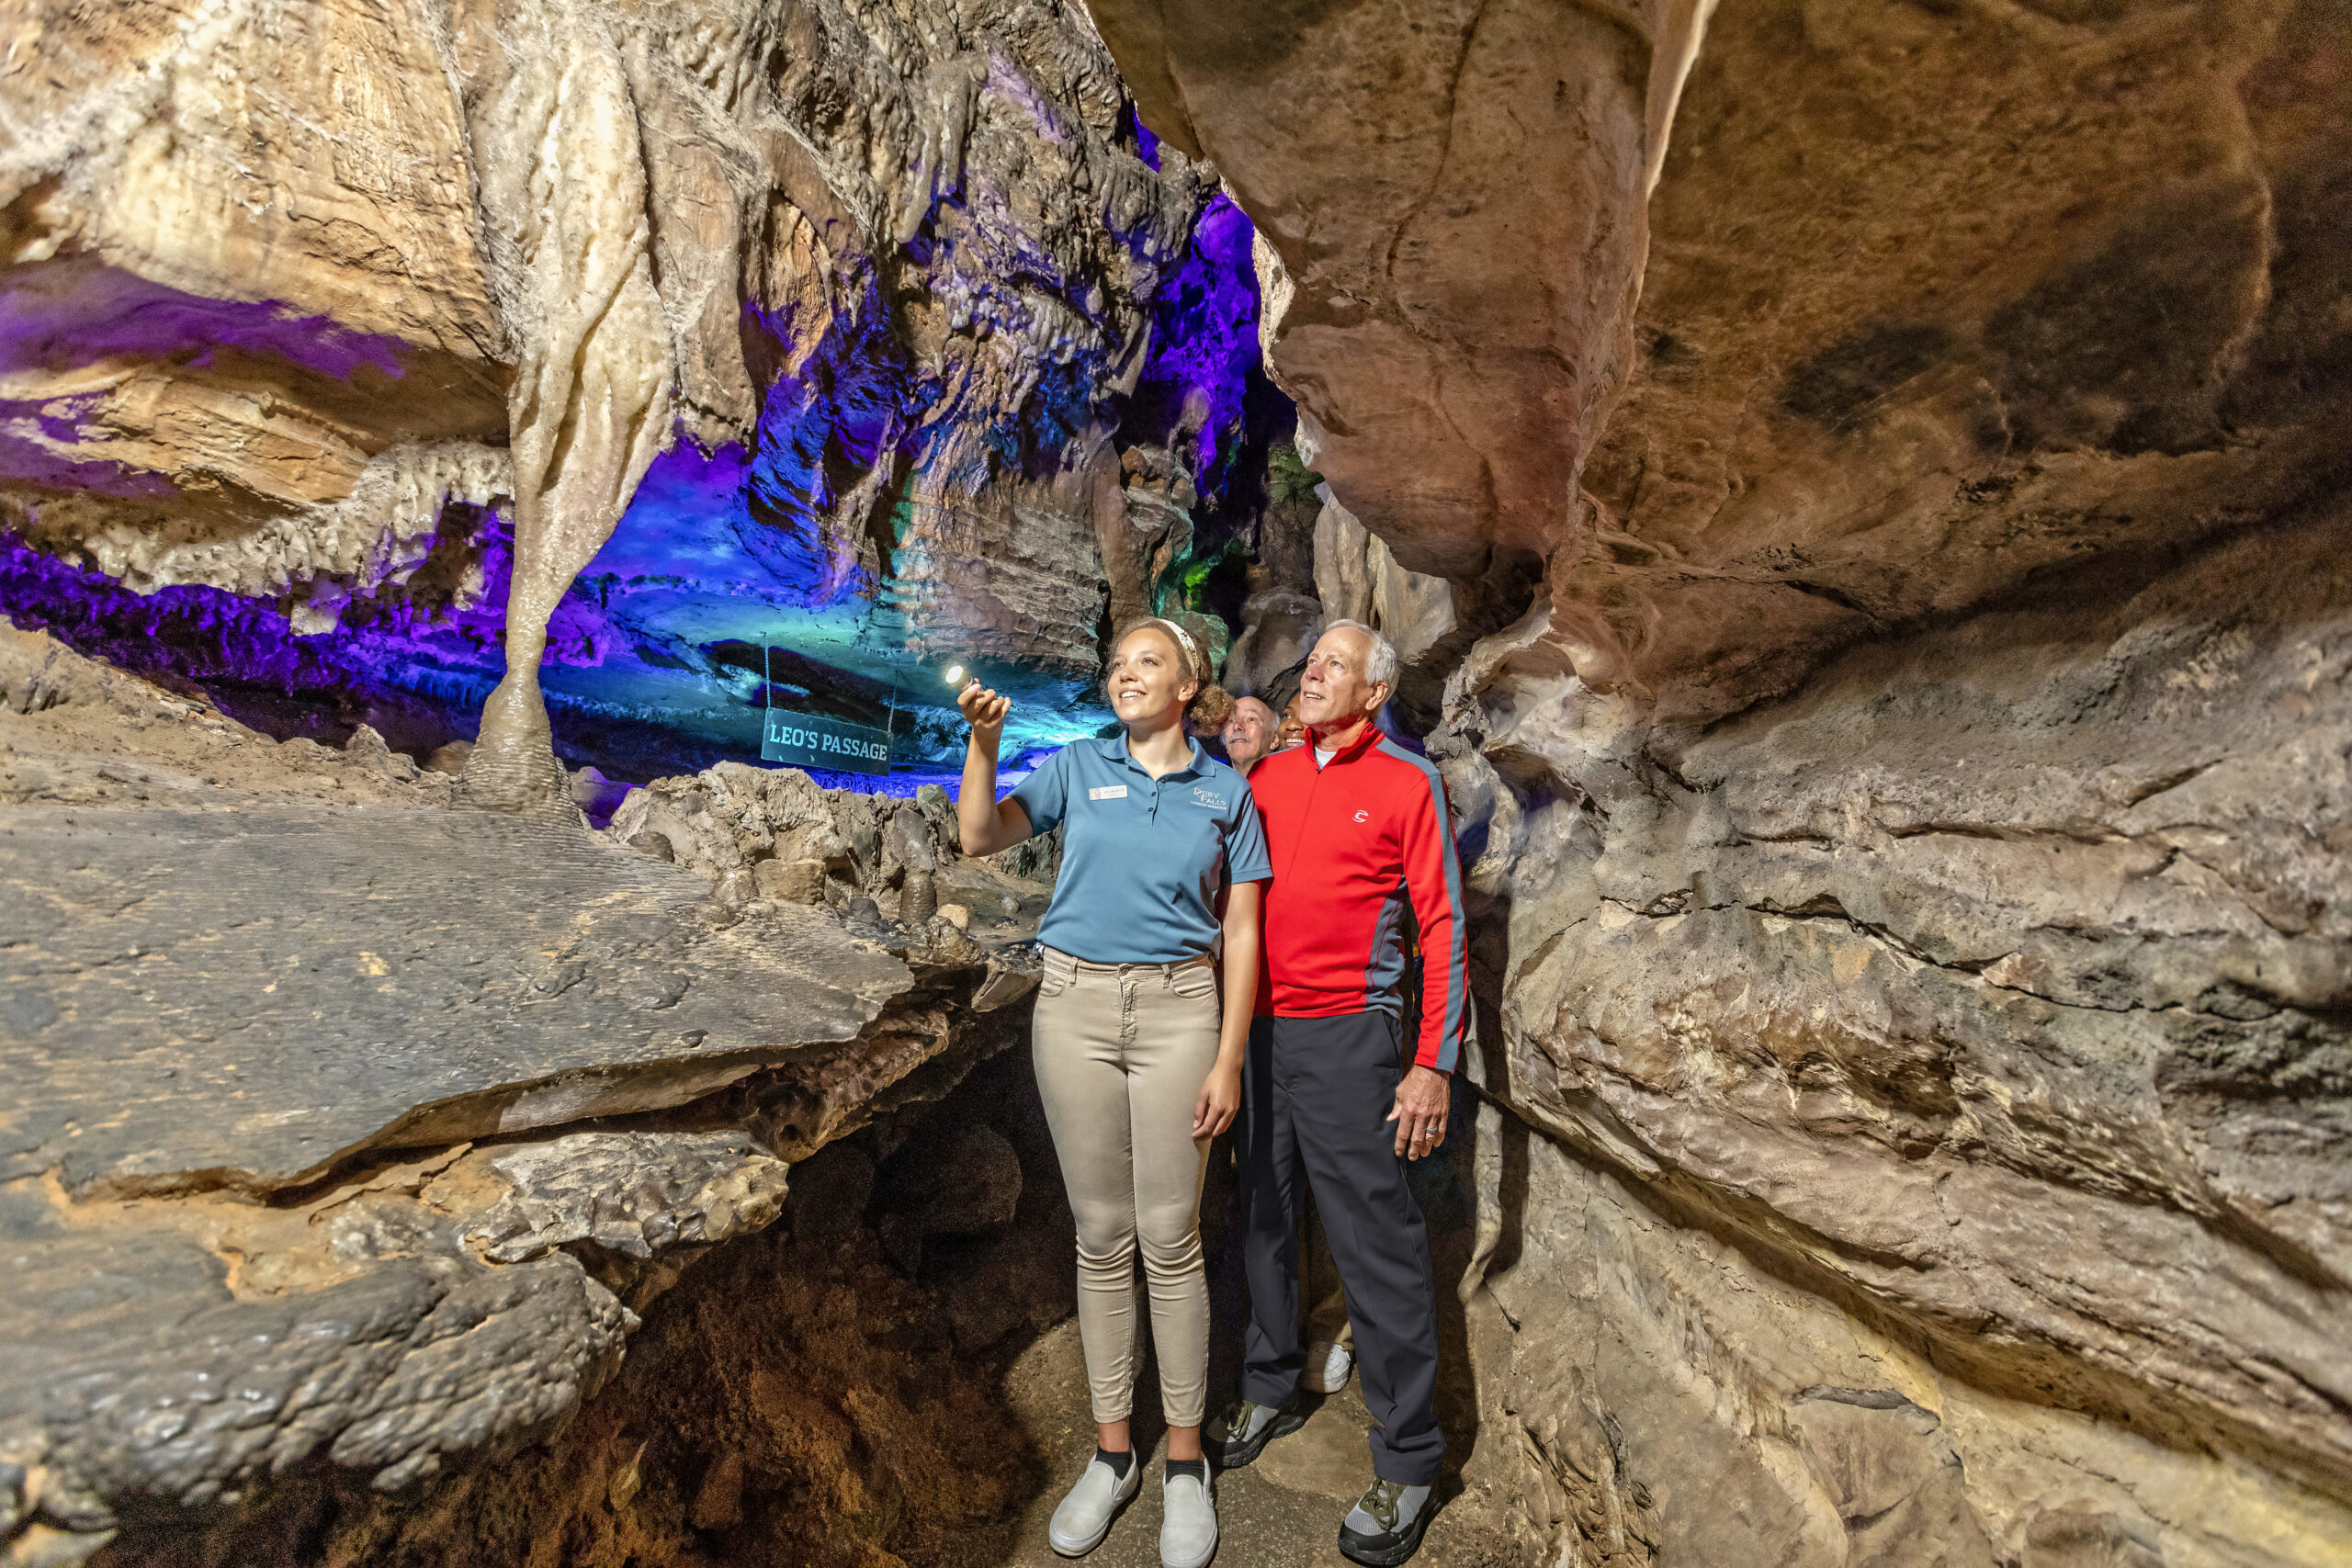 A tour guide in a blue shirt shines a light into the caves for a group of visitors behind her. A man in a red shirt stands next to her, looking at the caves